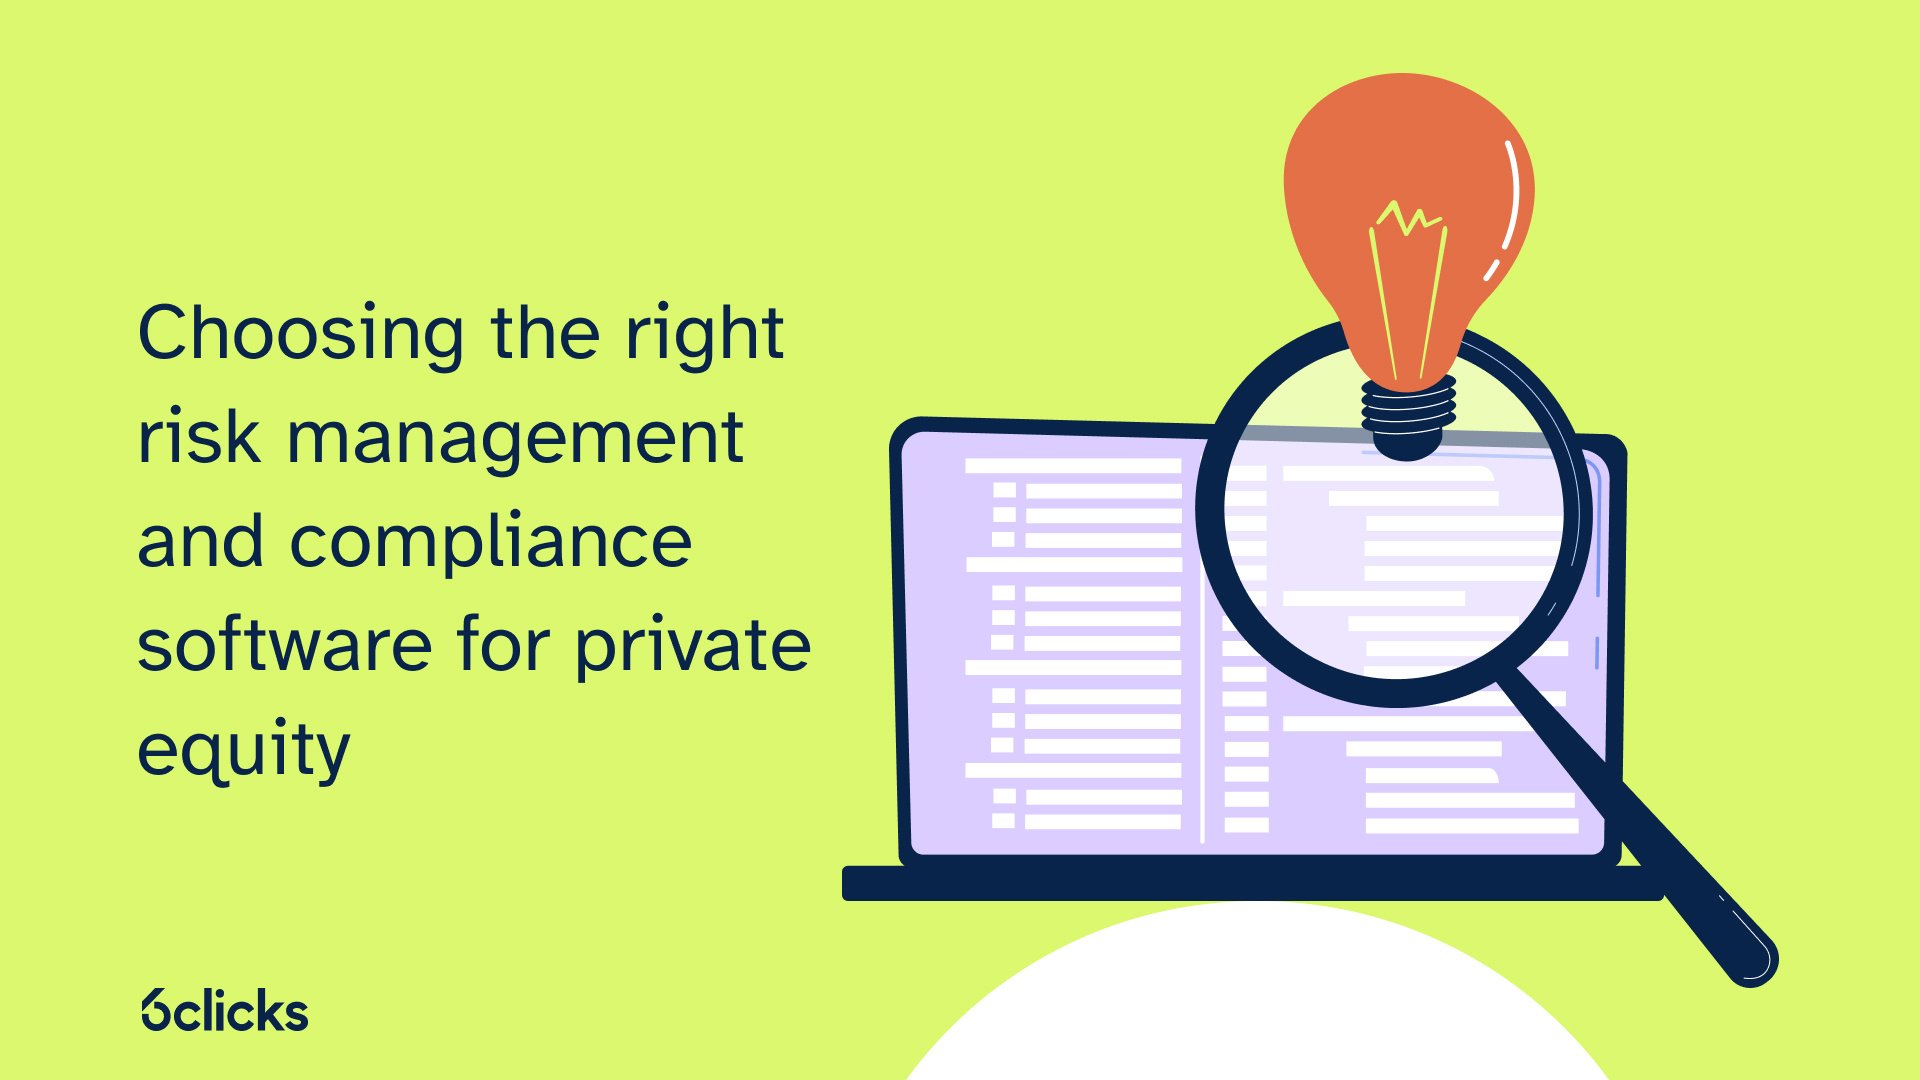 Choosing the right risk and compliance software for private equity